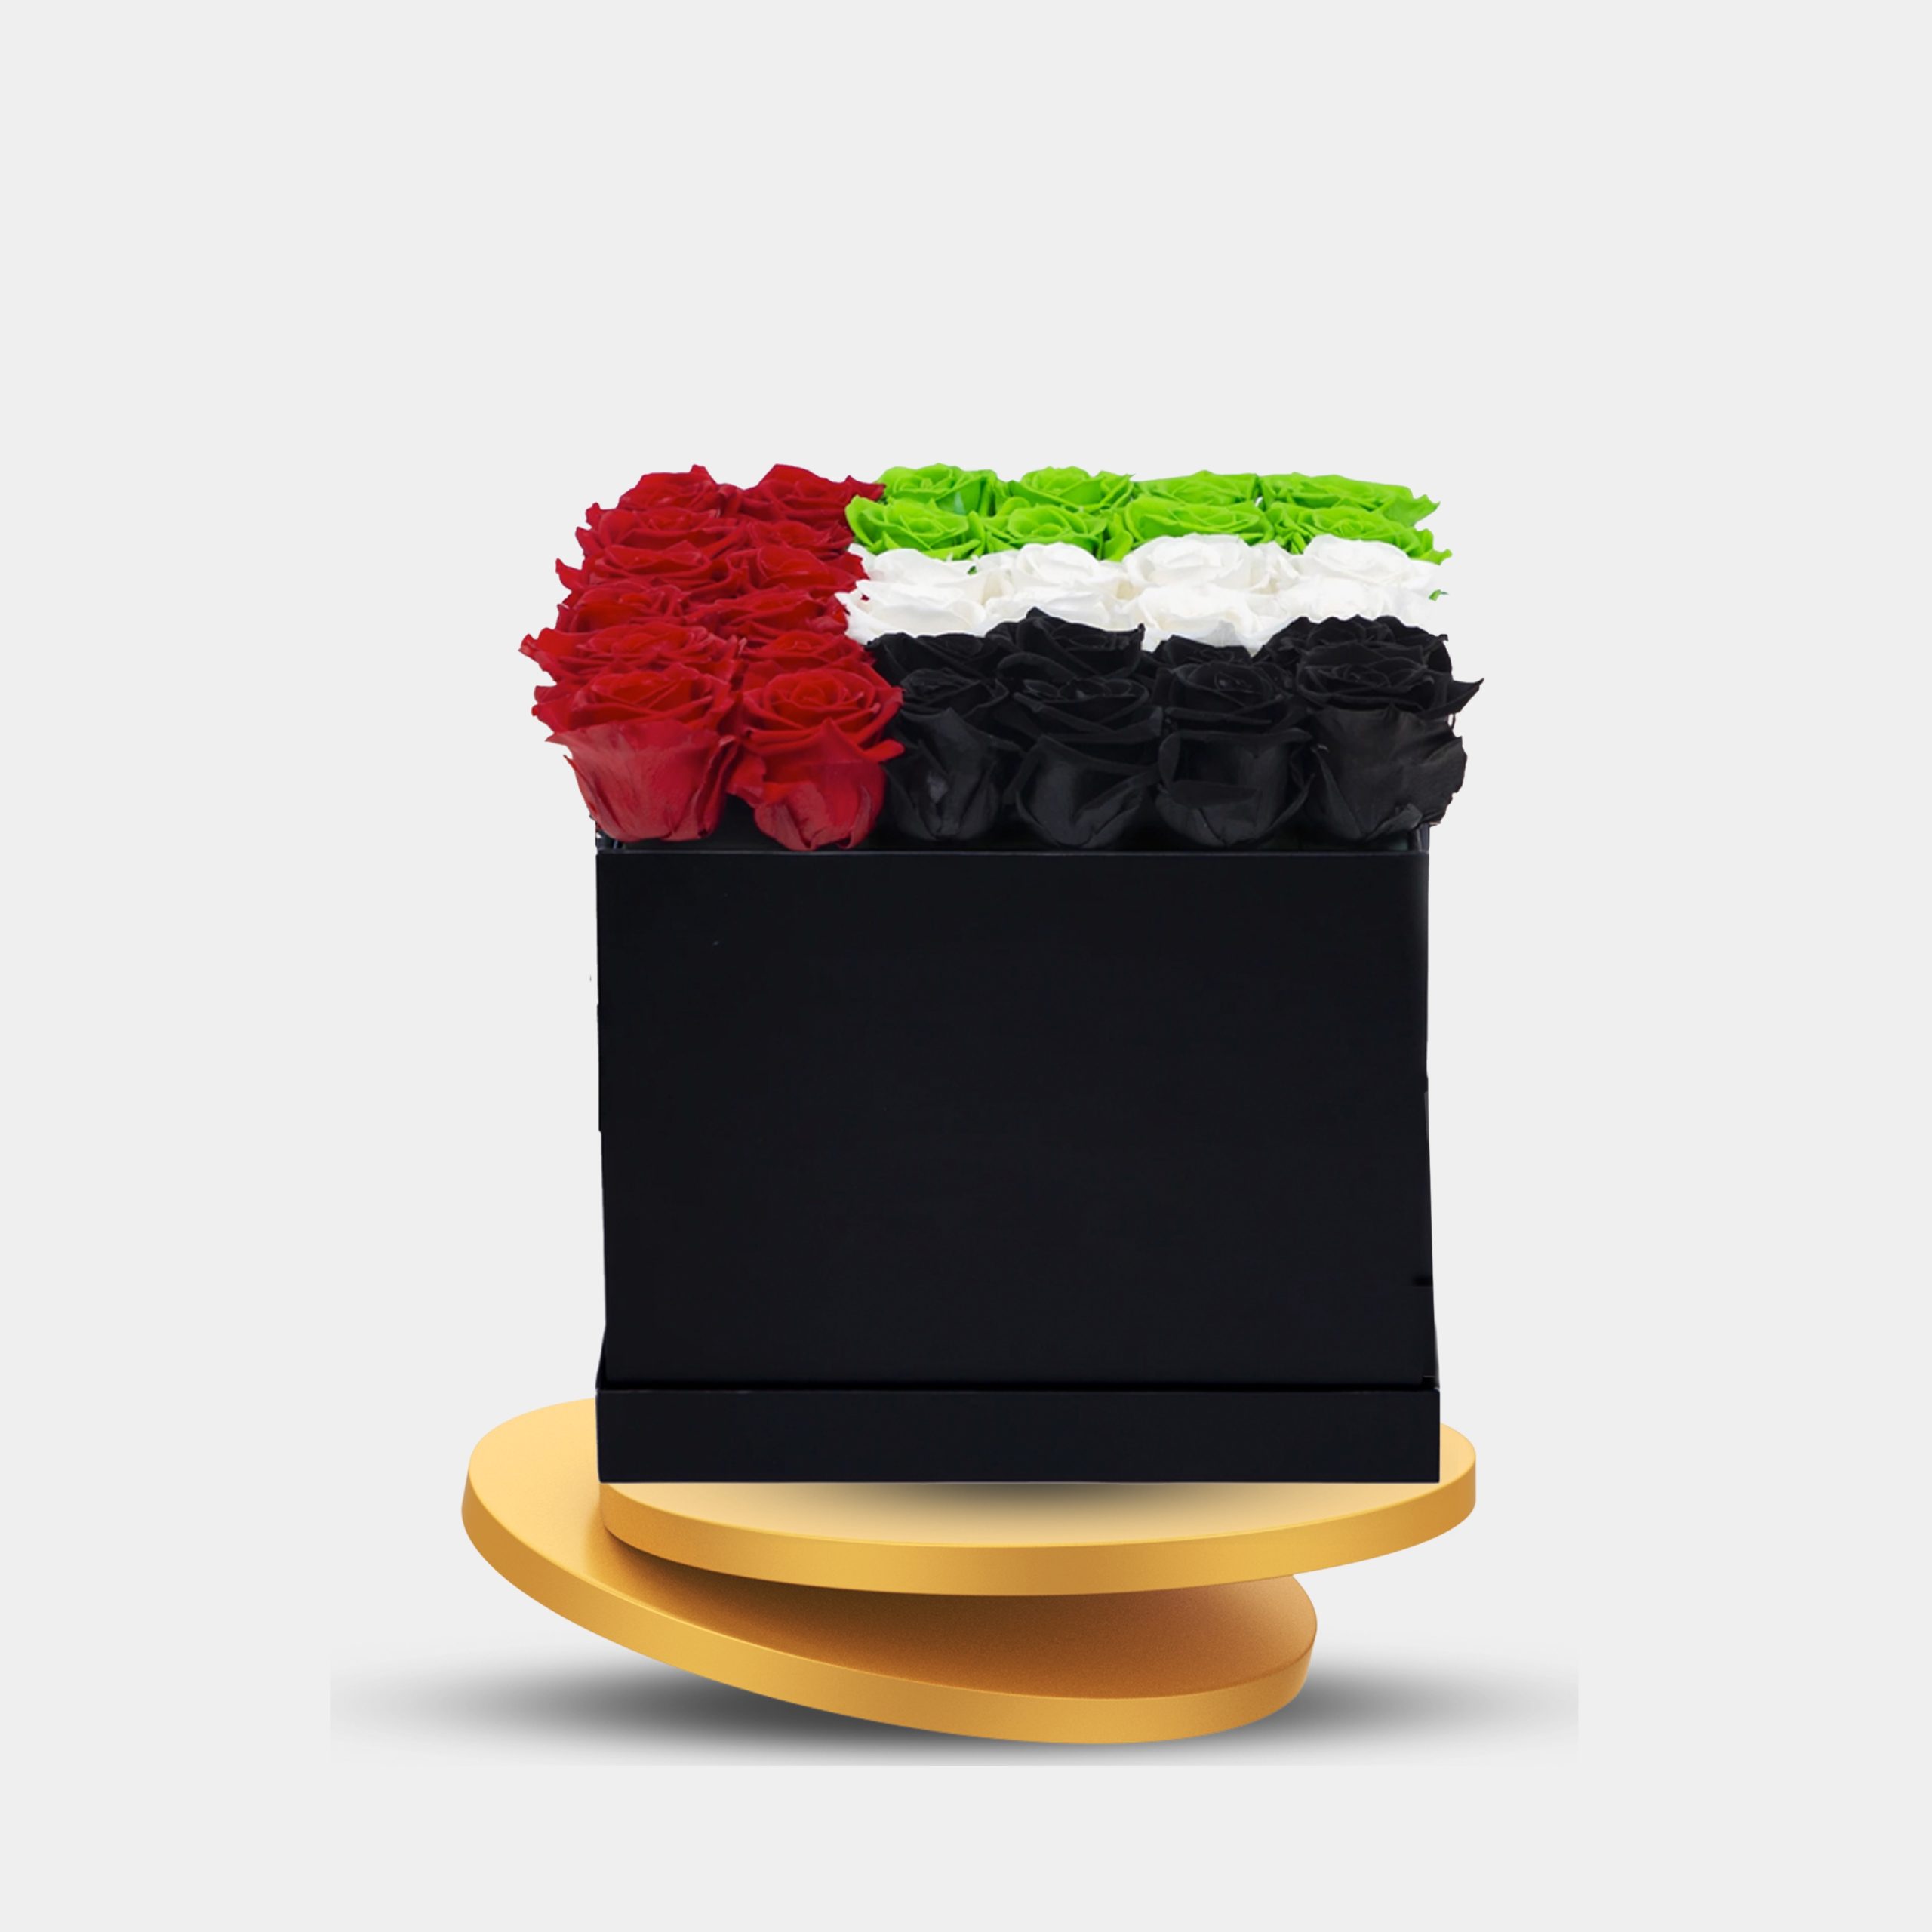 UAE national day flower bouquets in black box